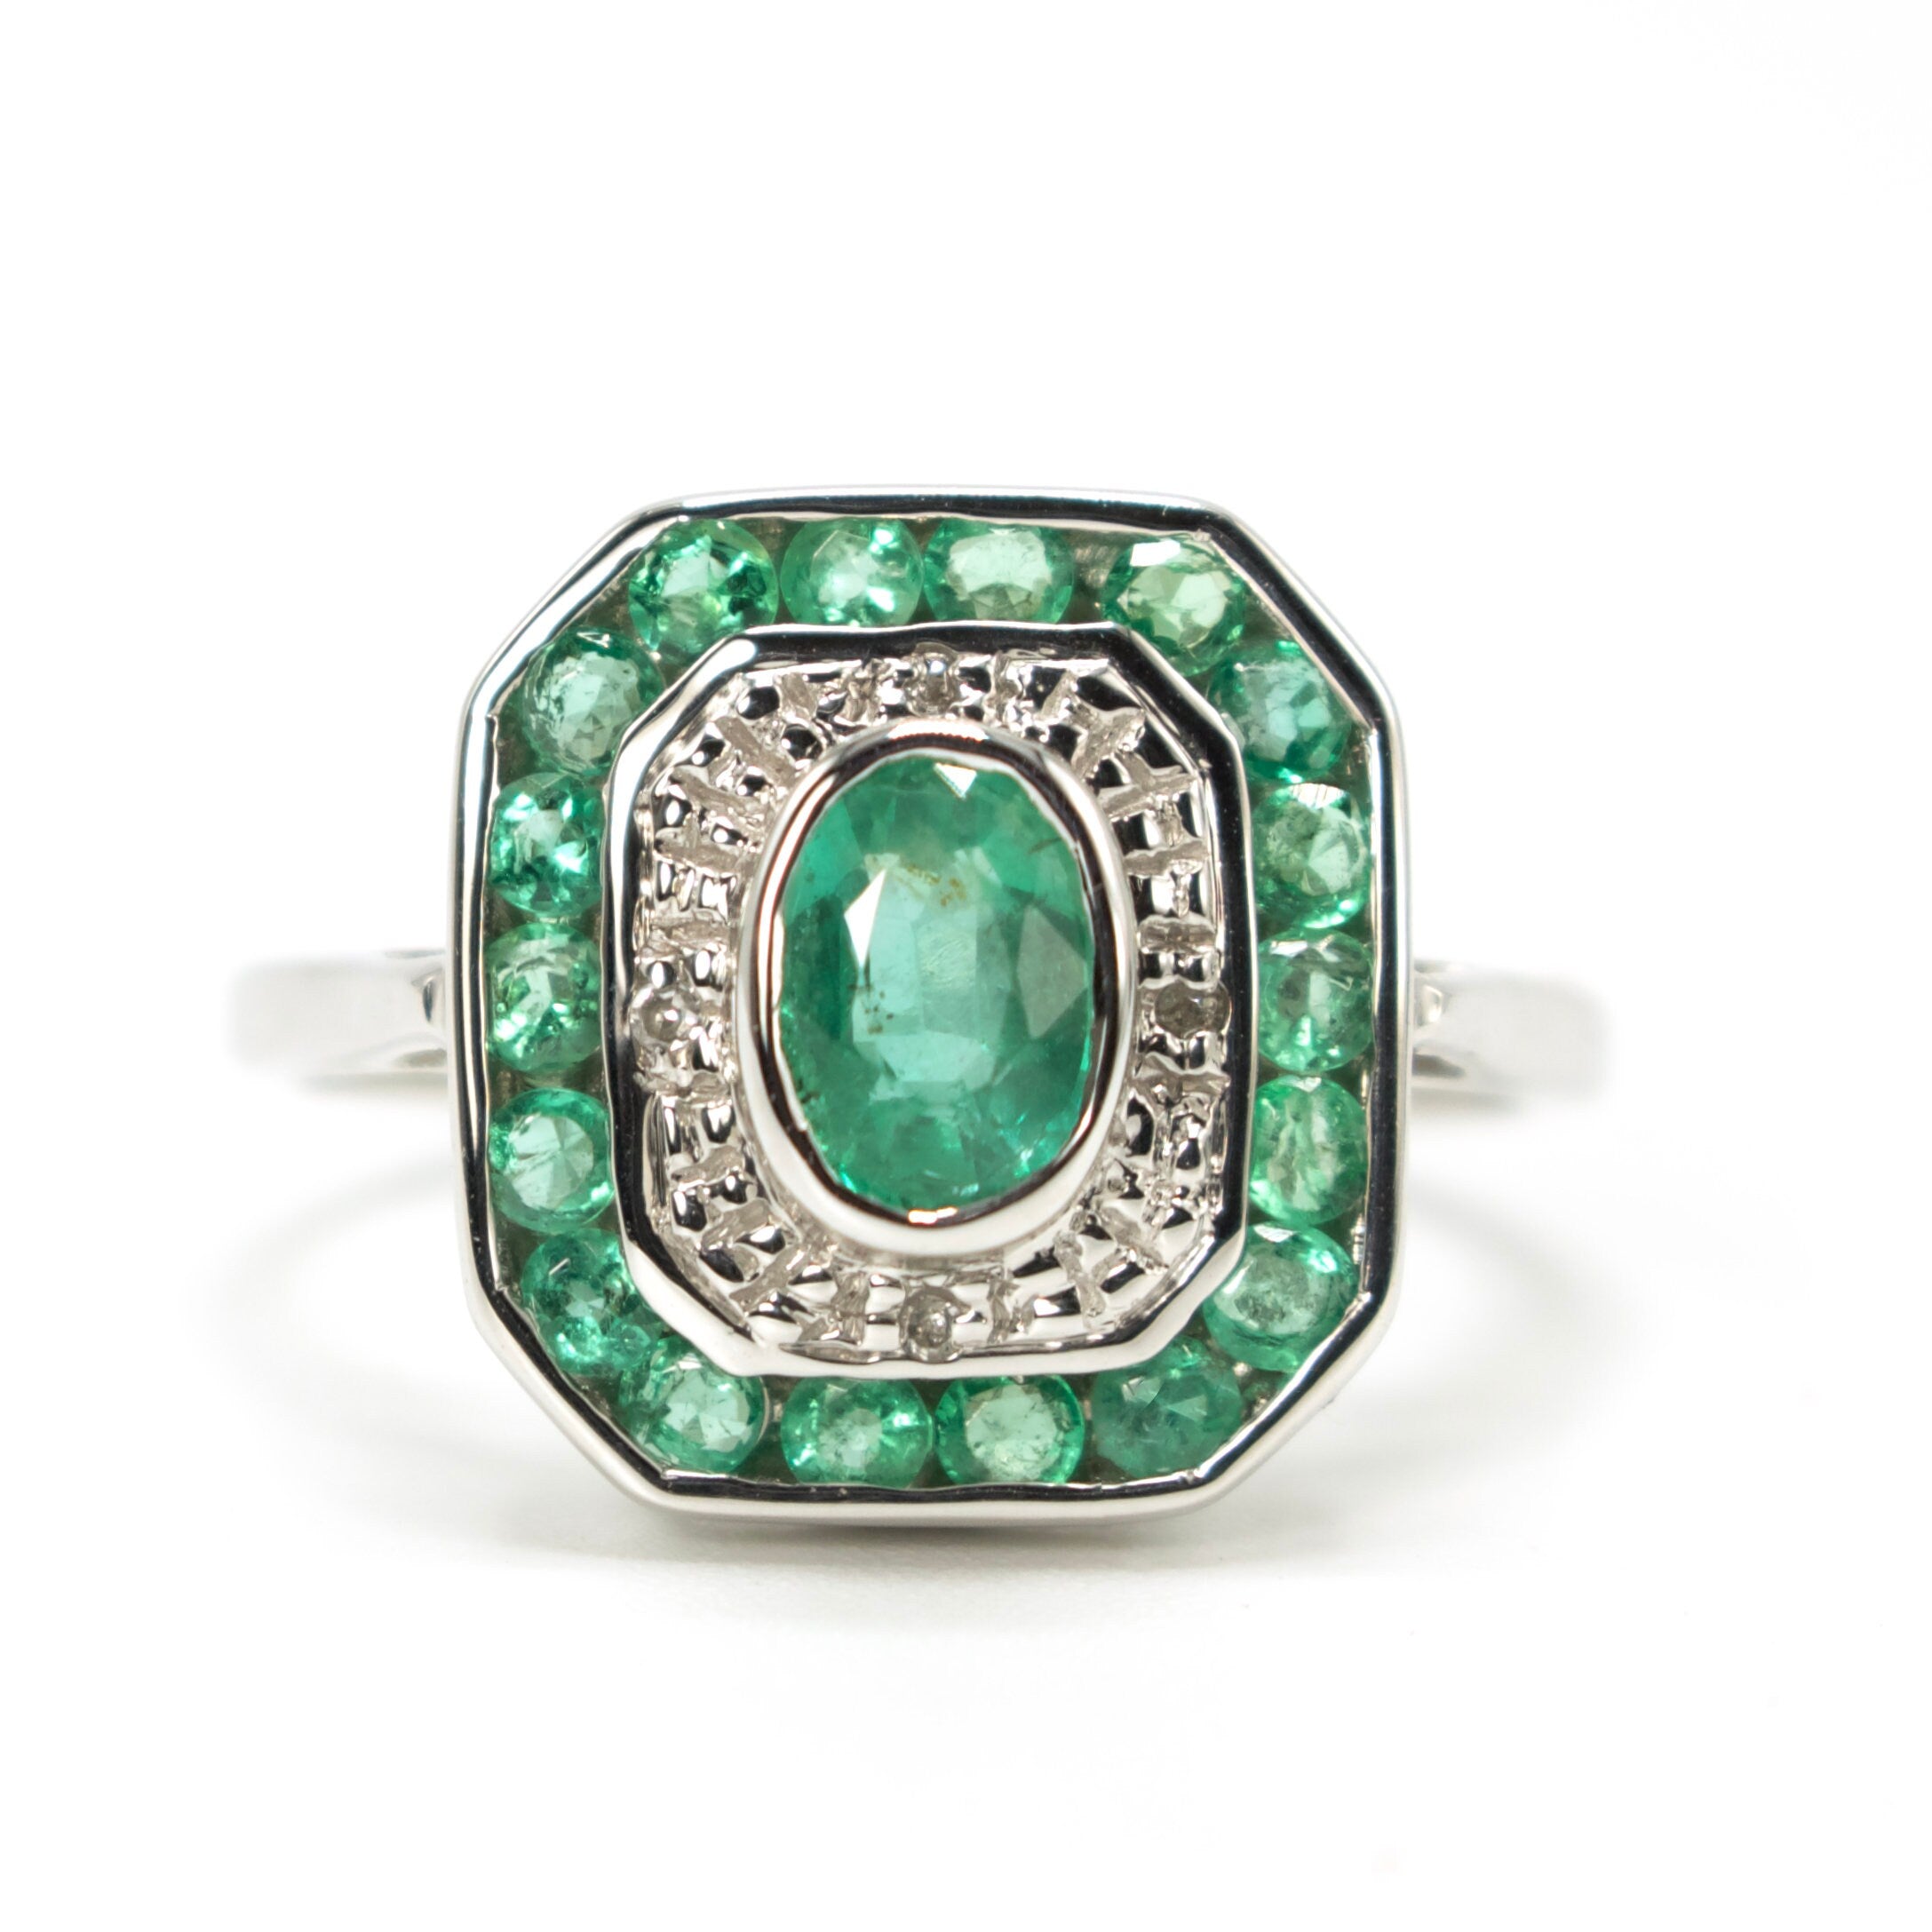 Edwardian Inspired Oval Emerald Square Topped Ring with Diamond and Emerald Accents